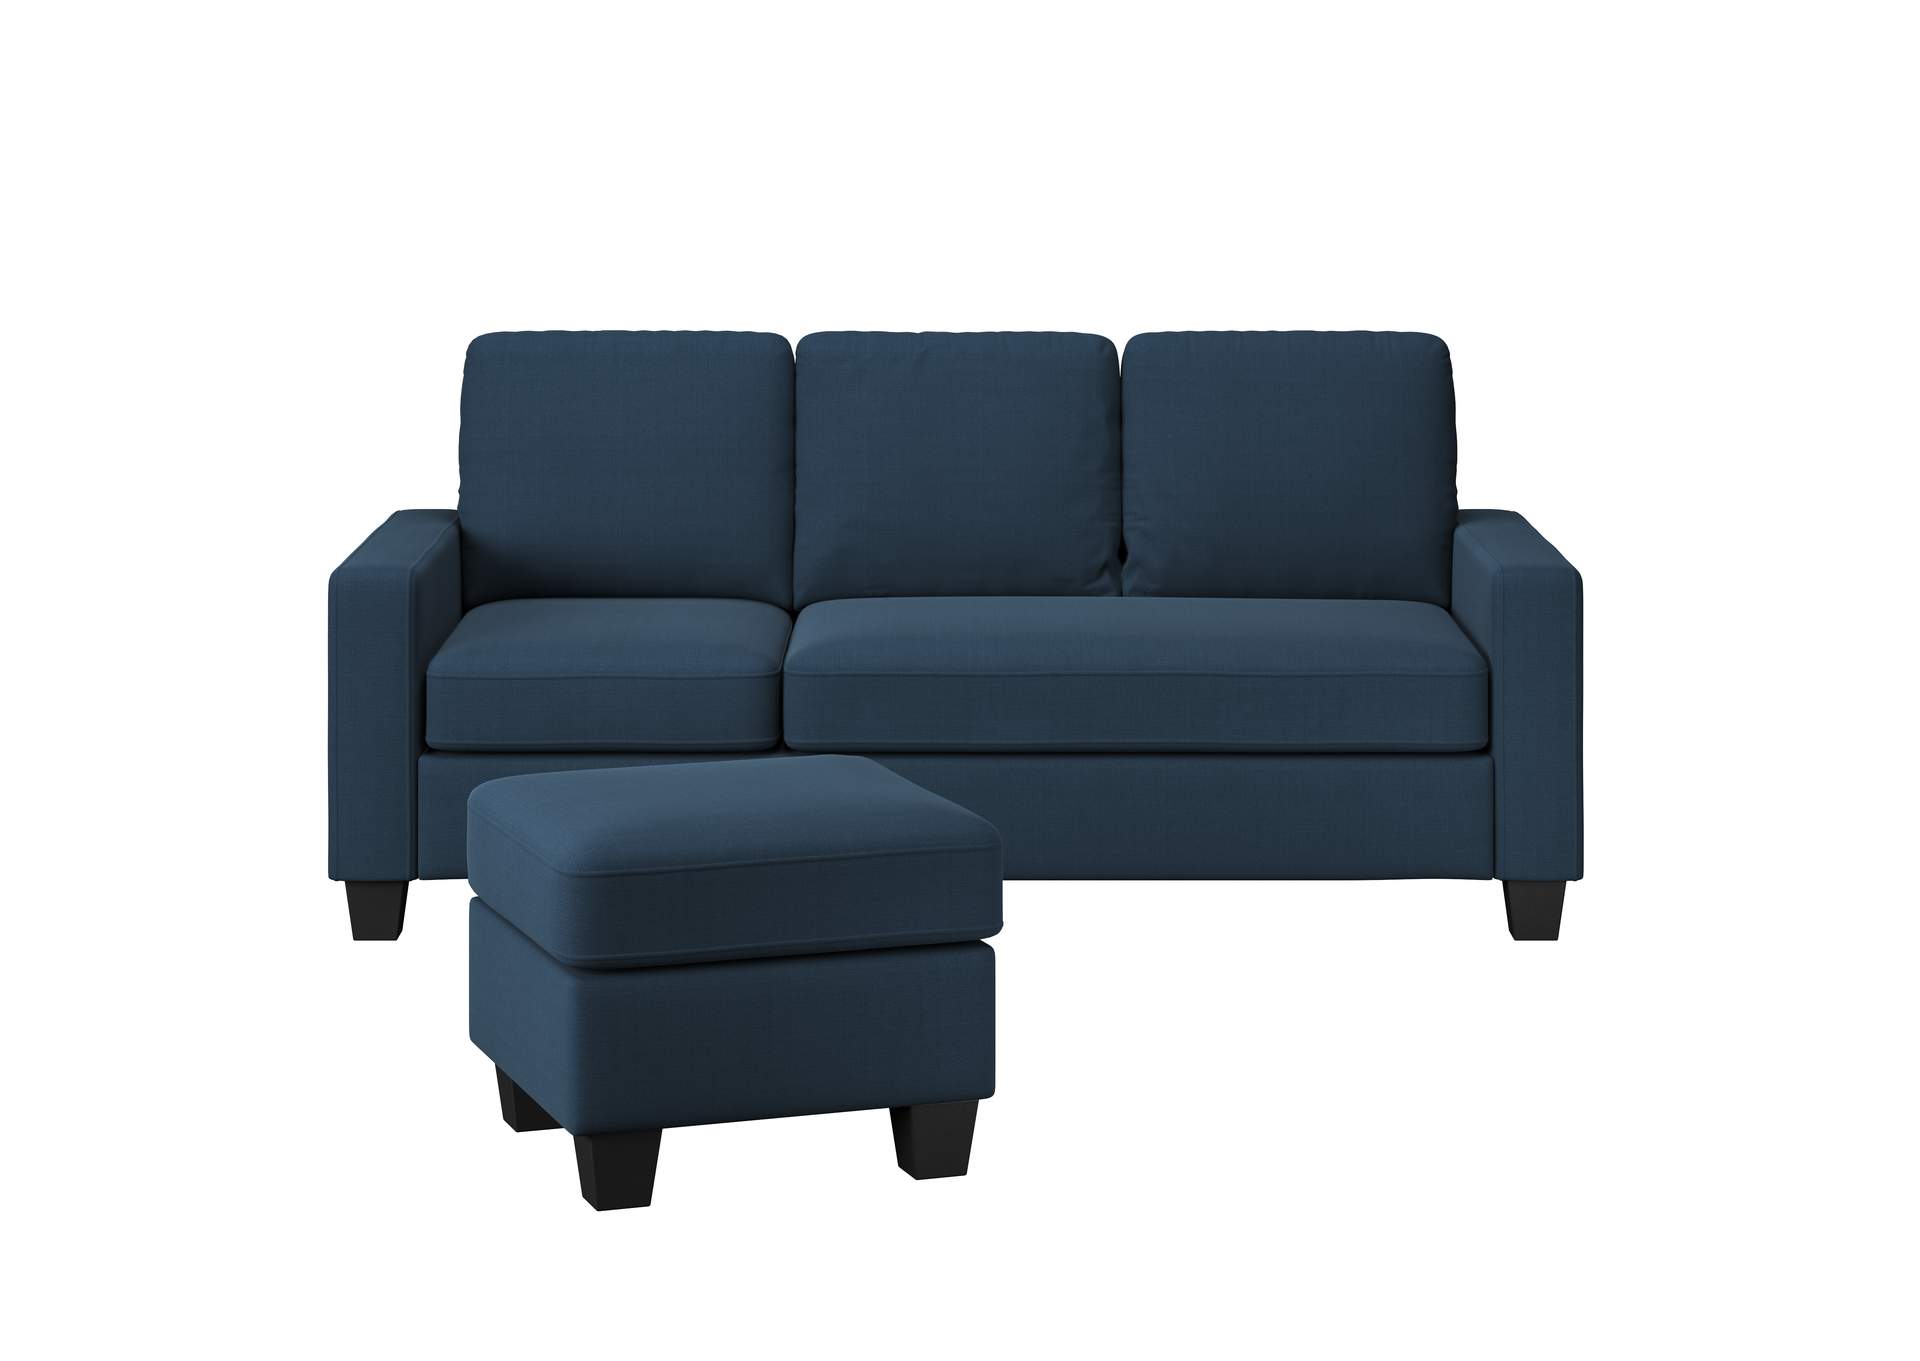 Nix Reconfigurable Chaise Sectional,Emerald Home Furnishings